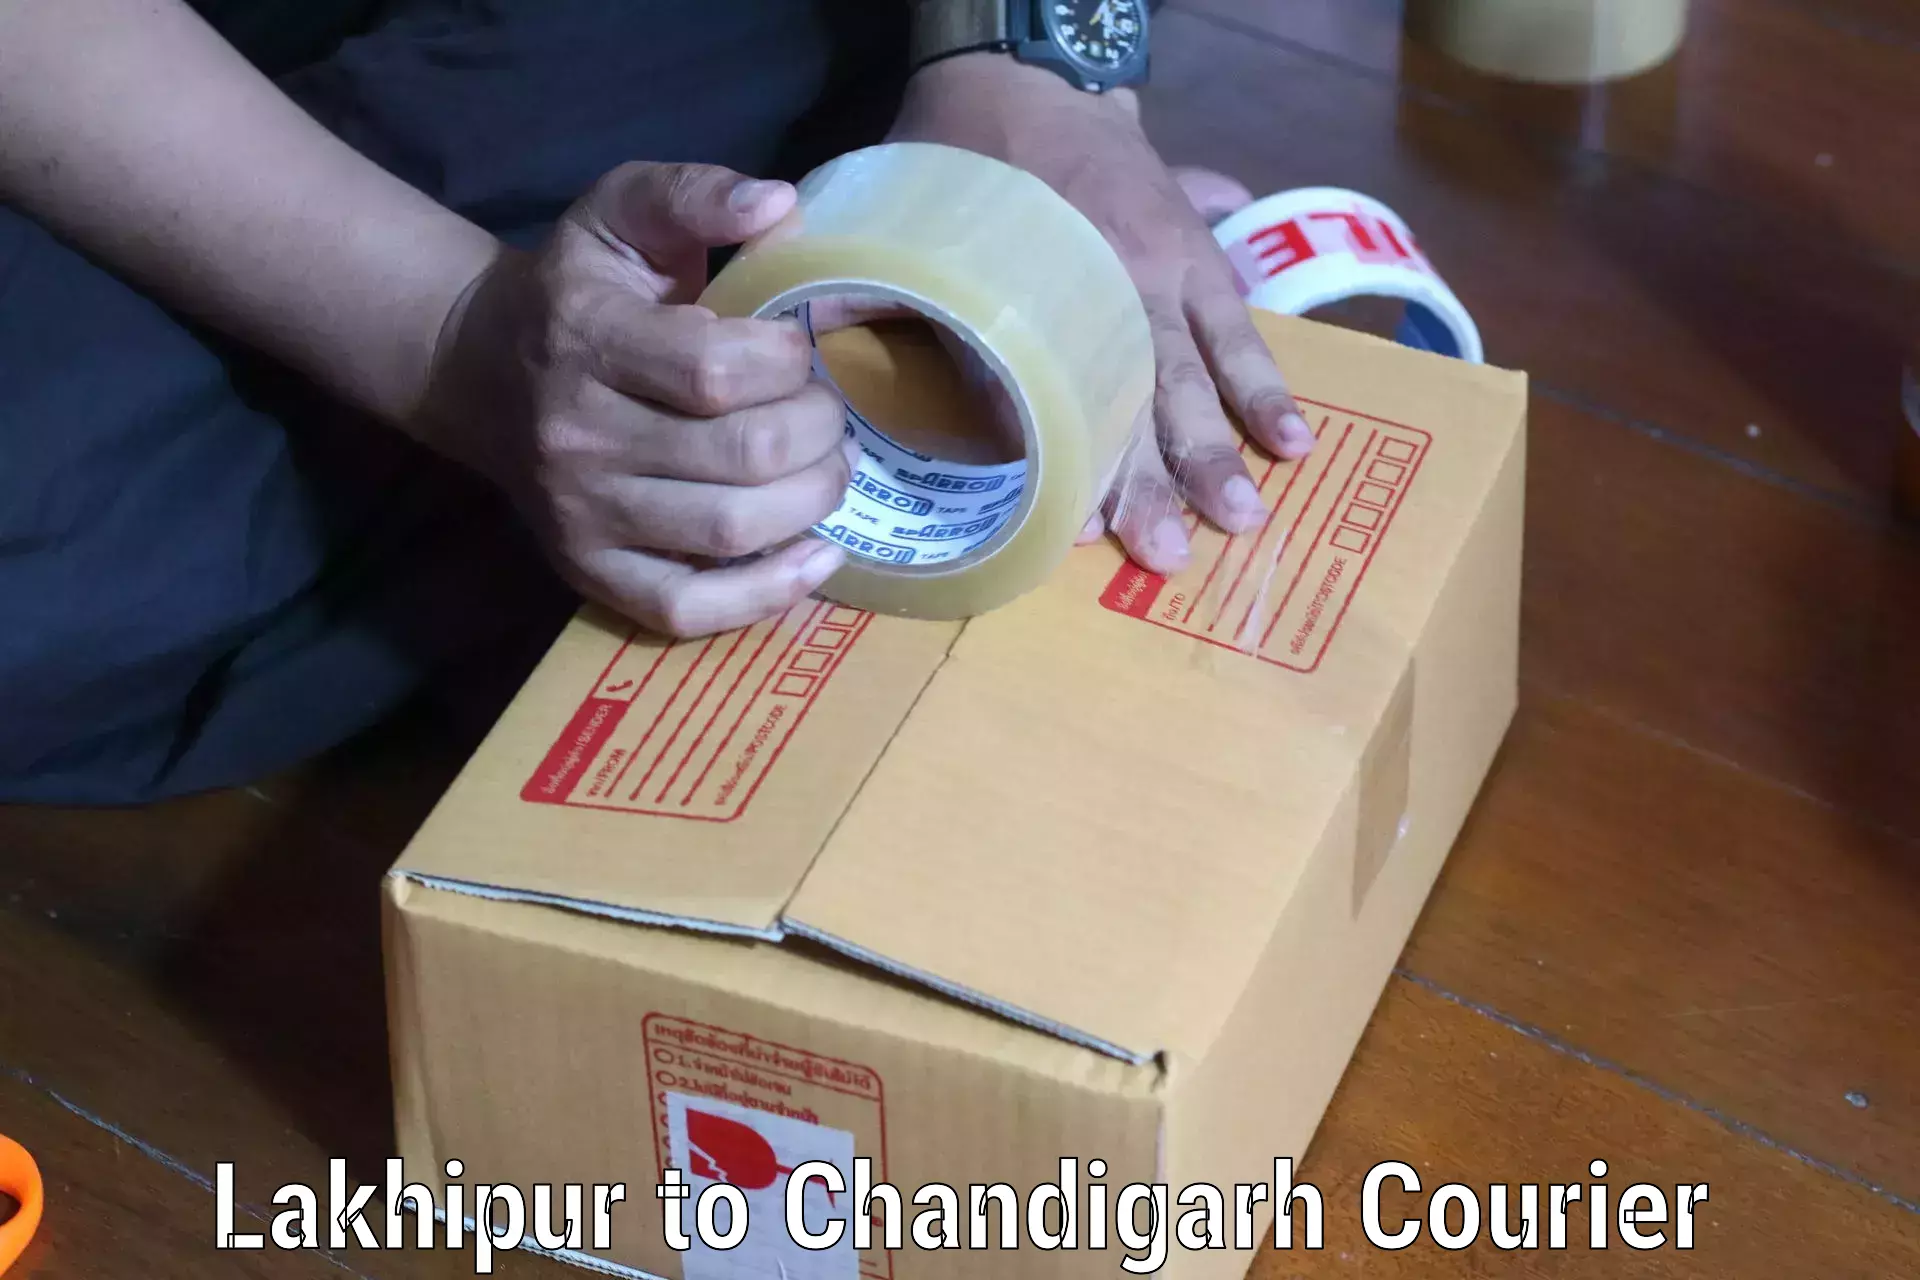 Professional courier handling Lakhipur to Chandigarh